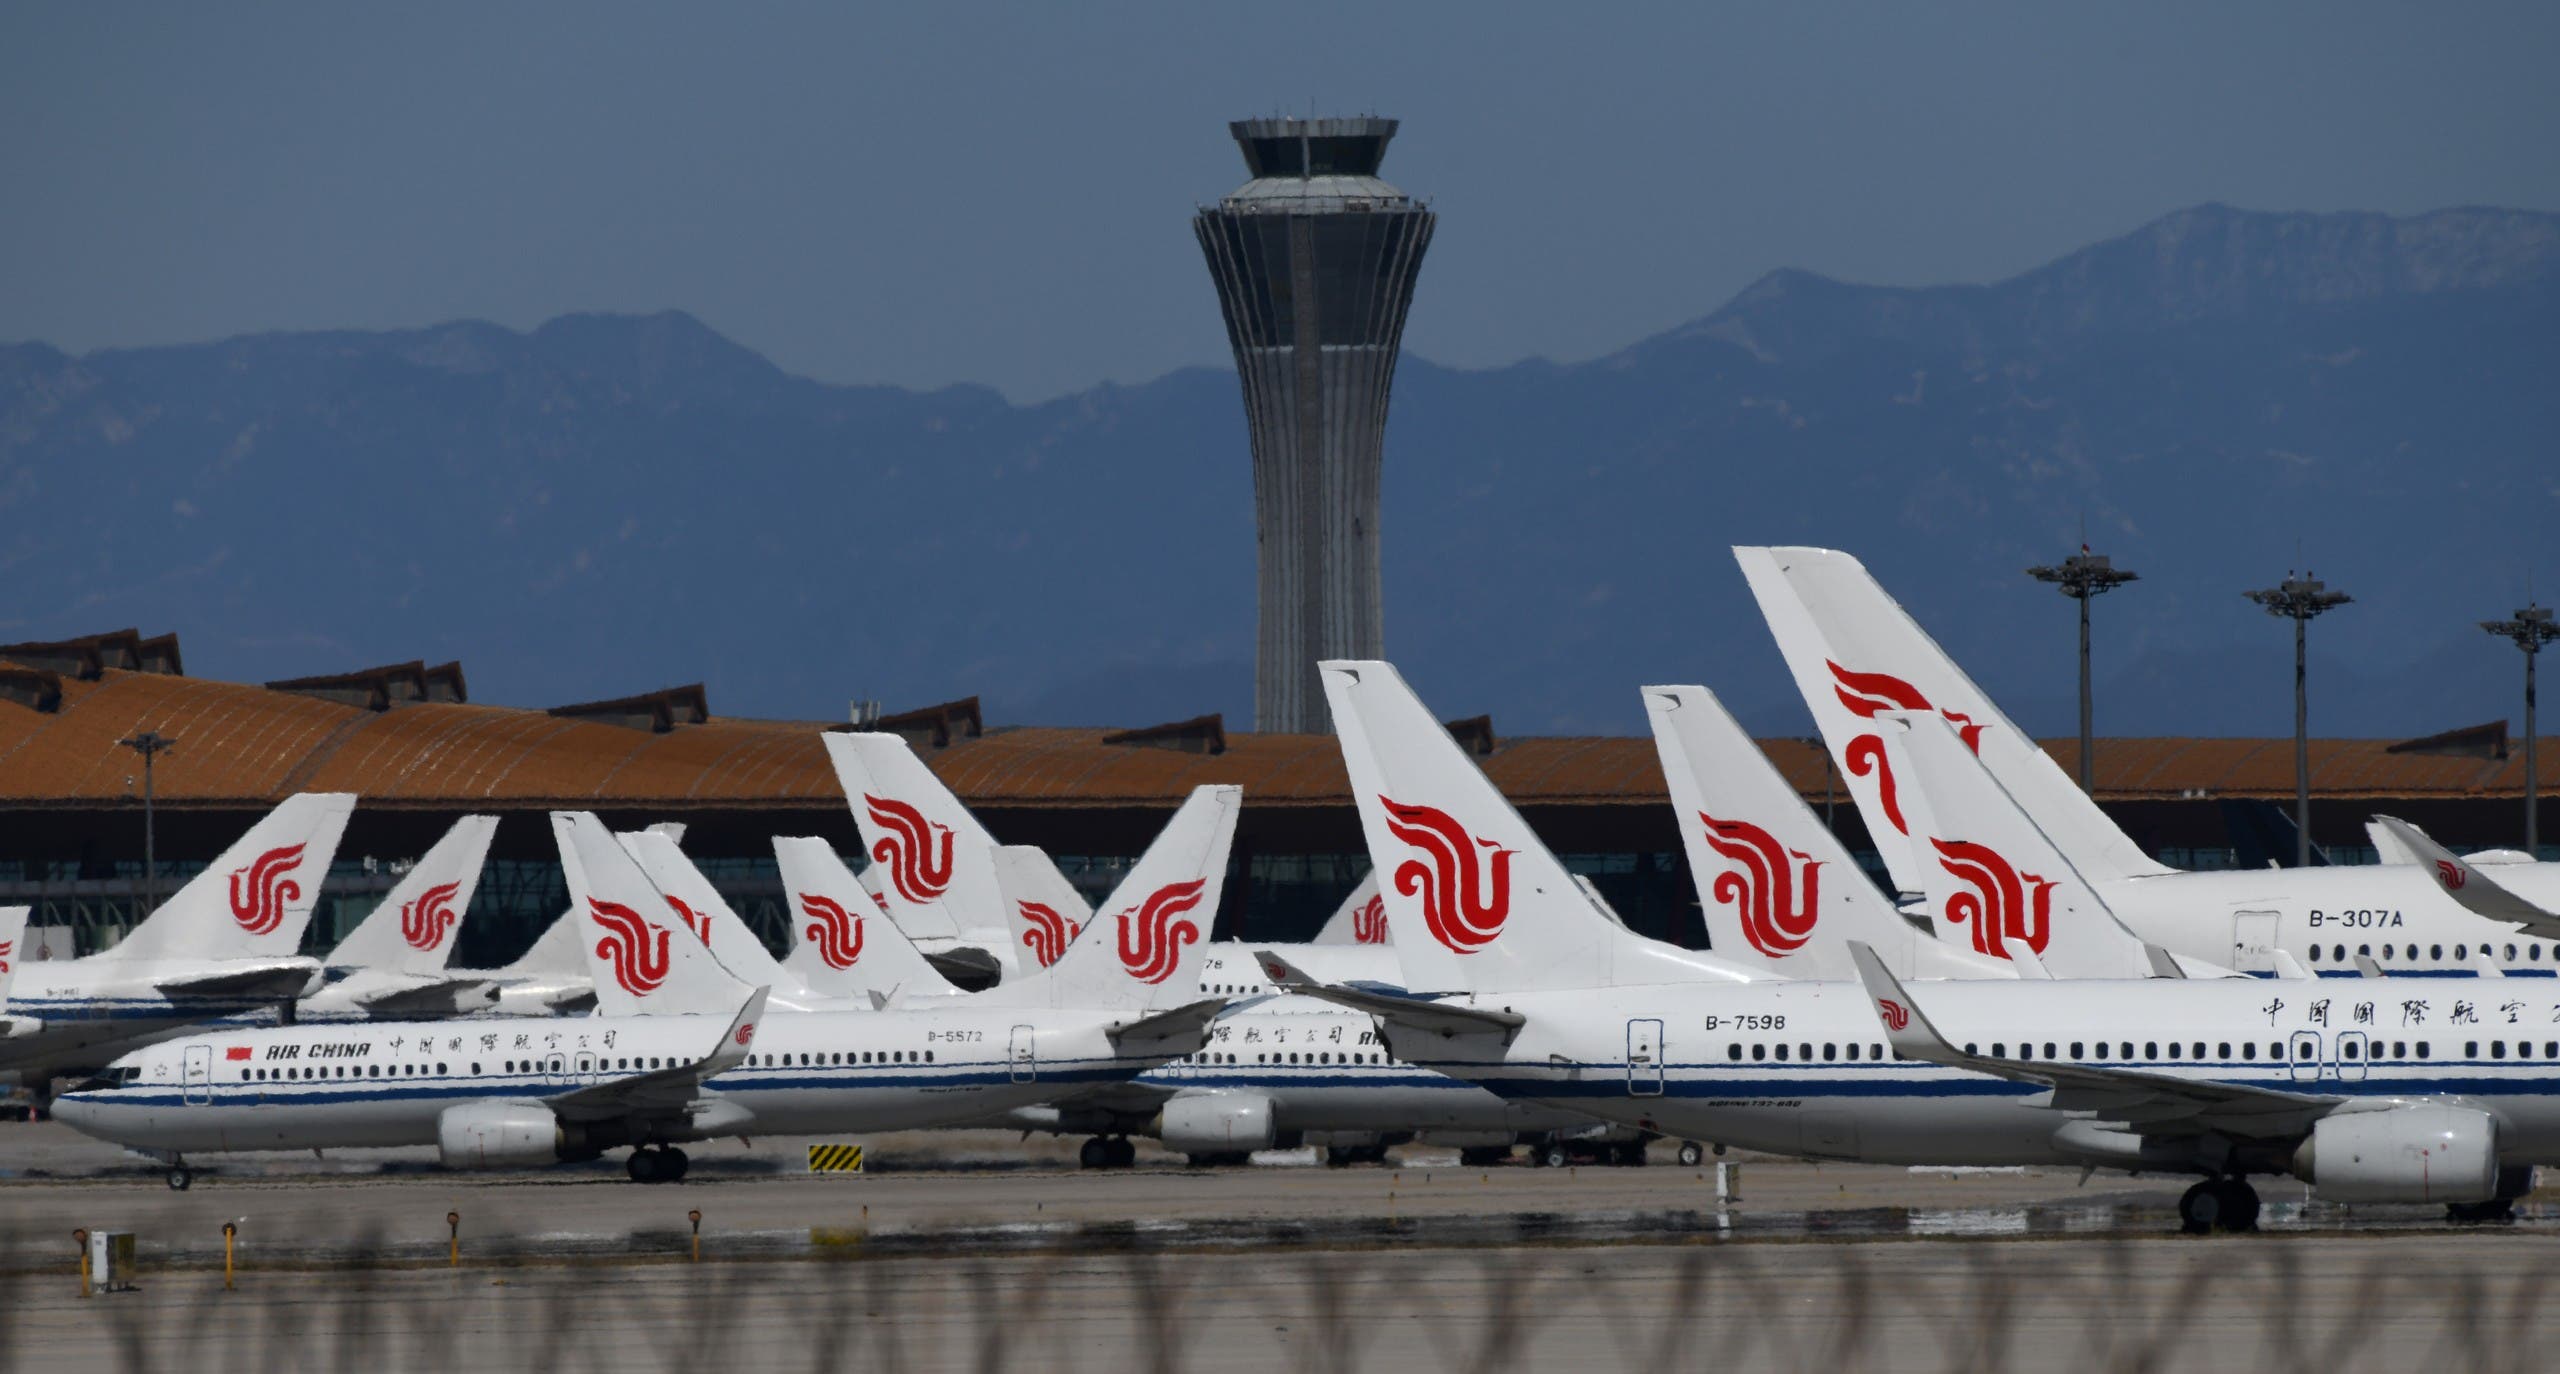 Air China planes seen parked on the tarmac at Beijing Capital Airport, China, during the coronavirus pandemic. (File photo: AFP)